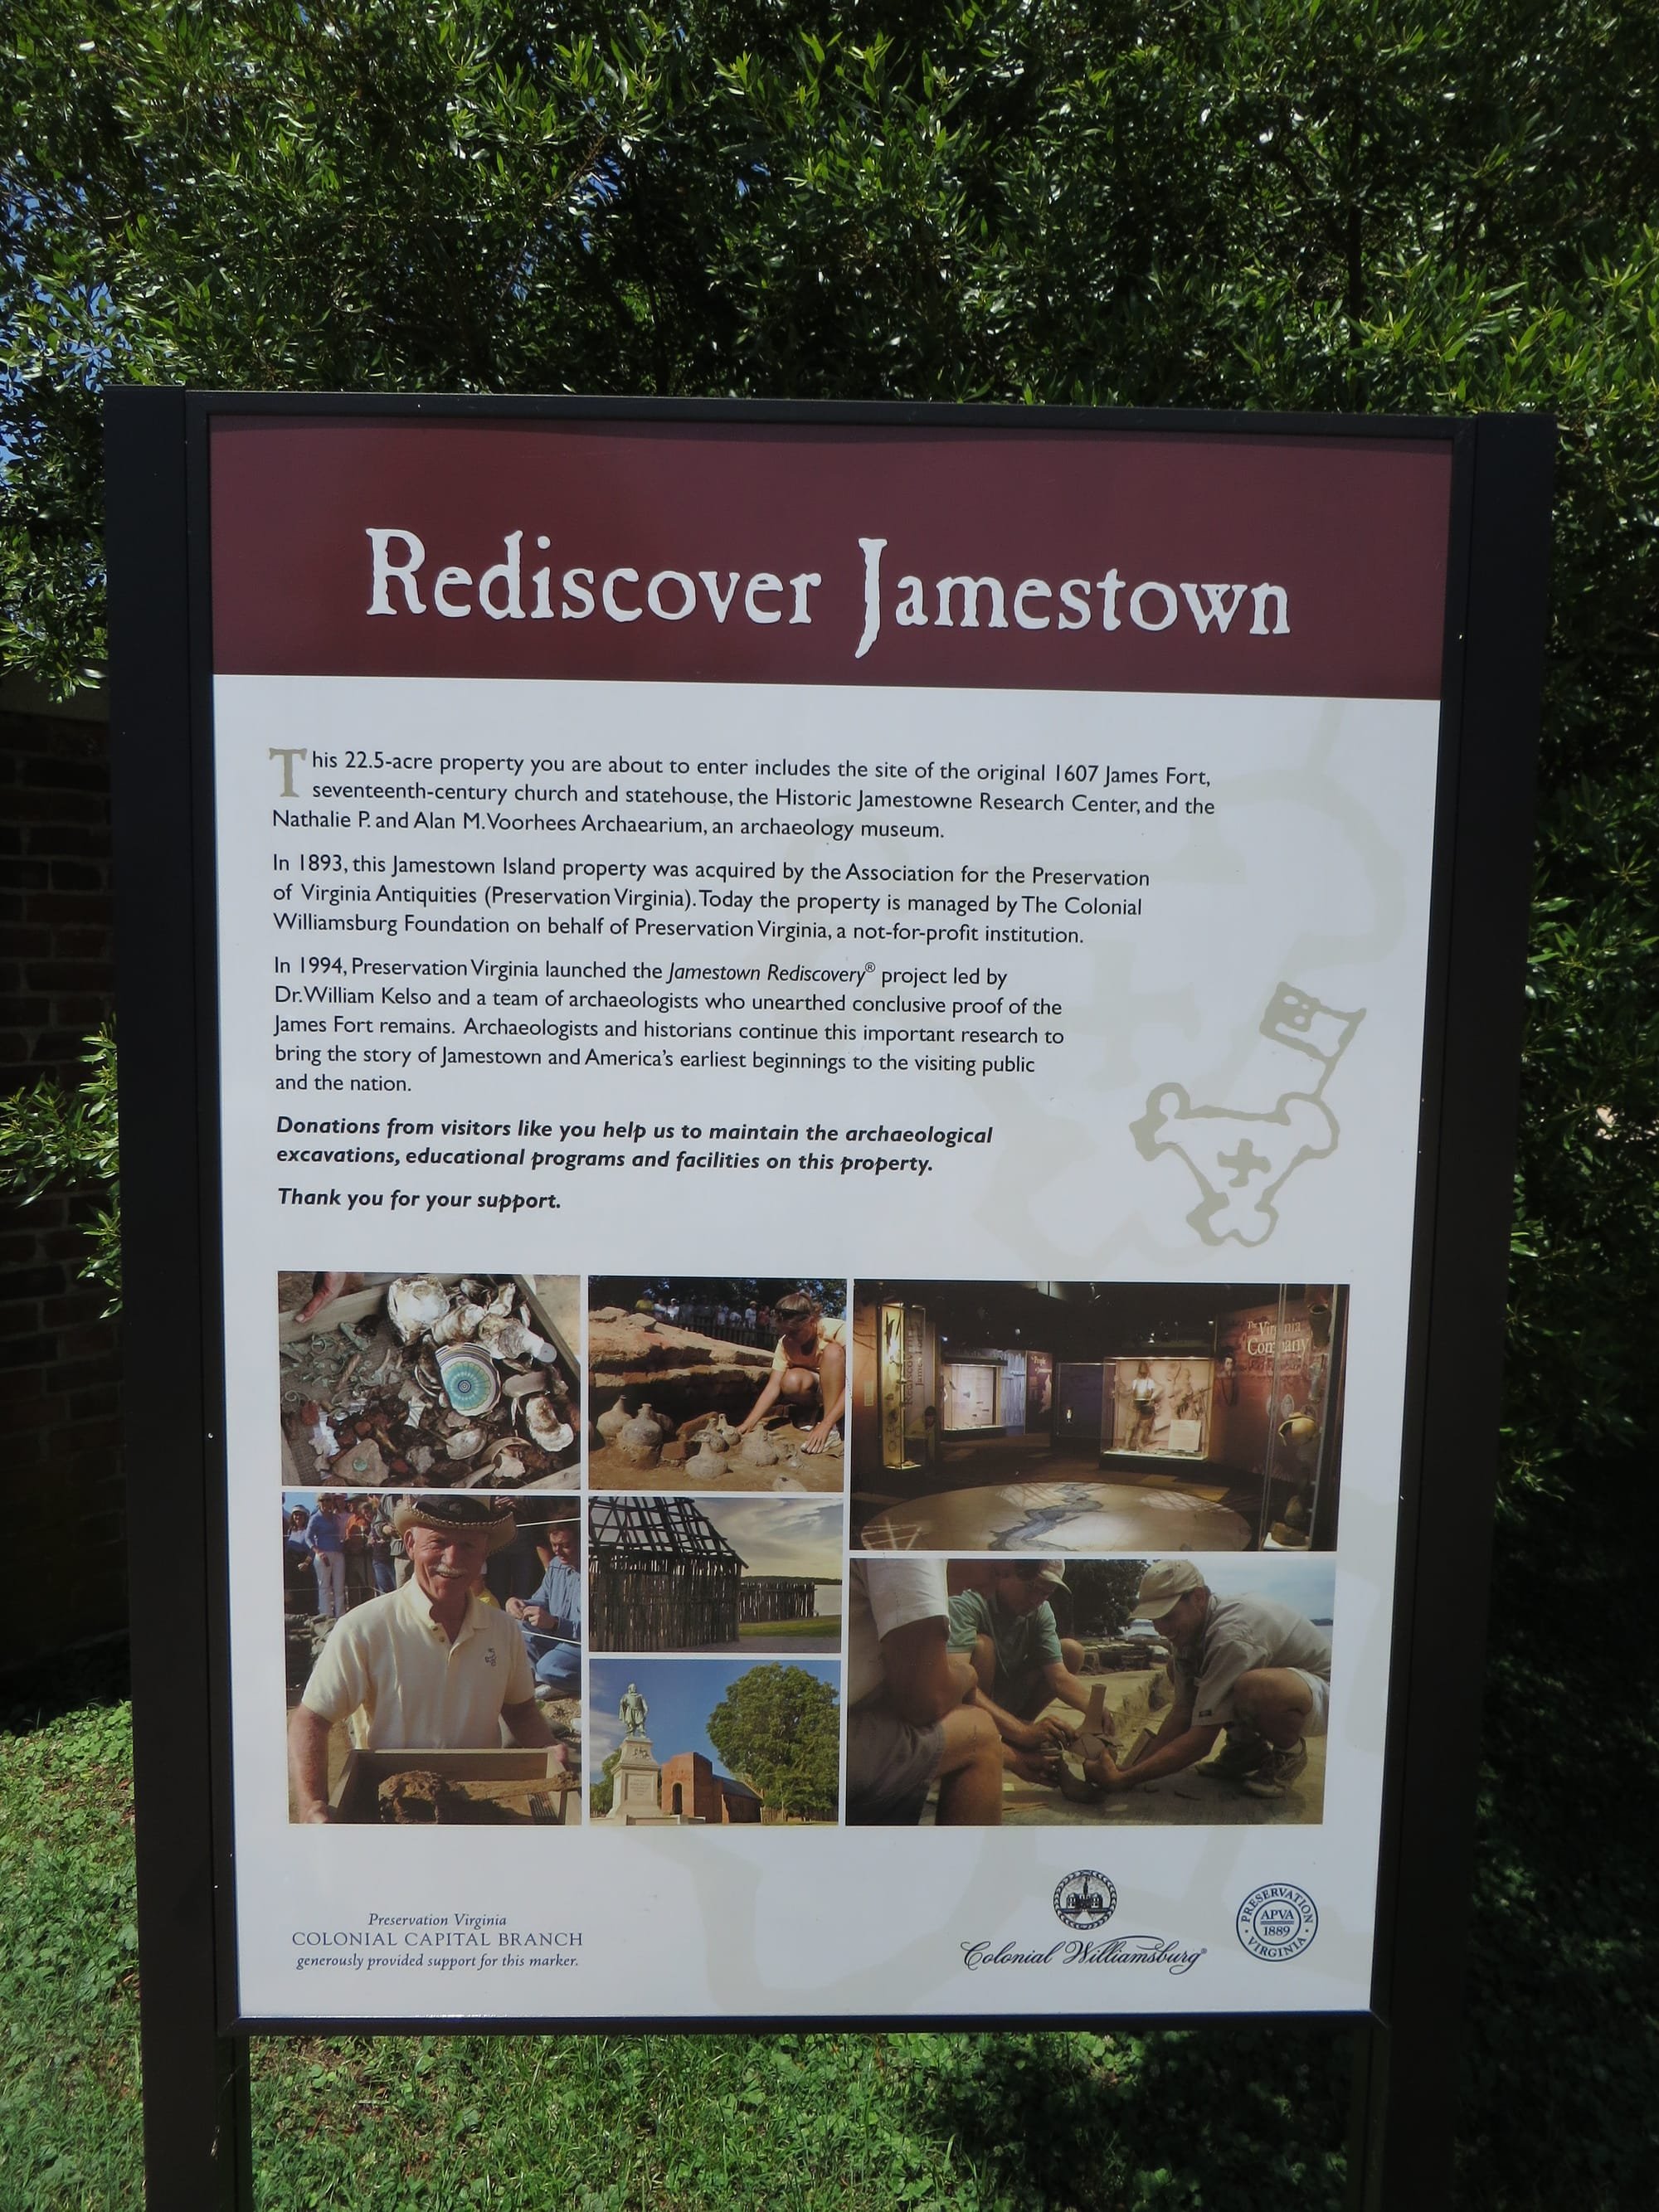 "Rediscover Jamestown Interpretive Sign, Historic Jamestowne, Colonial National Historical Park, Jamestown, Virginia" by Ken Lund is licensed under CC BY-SA 2.0.